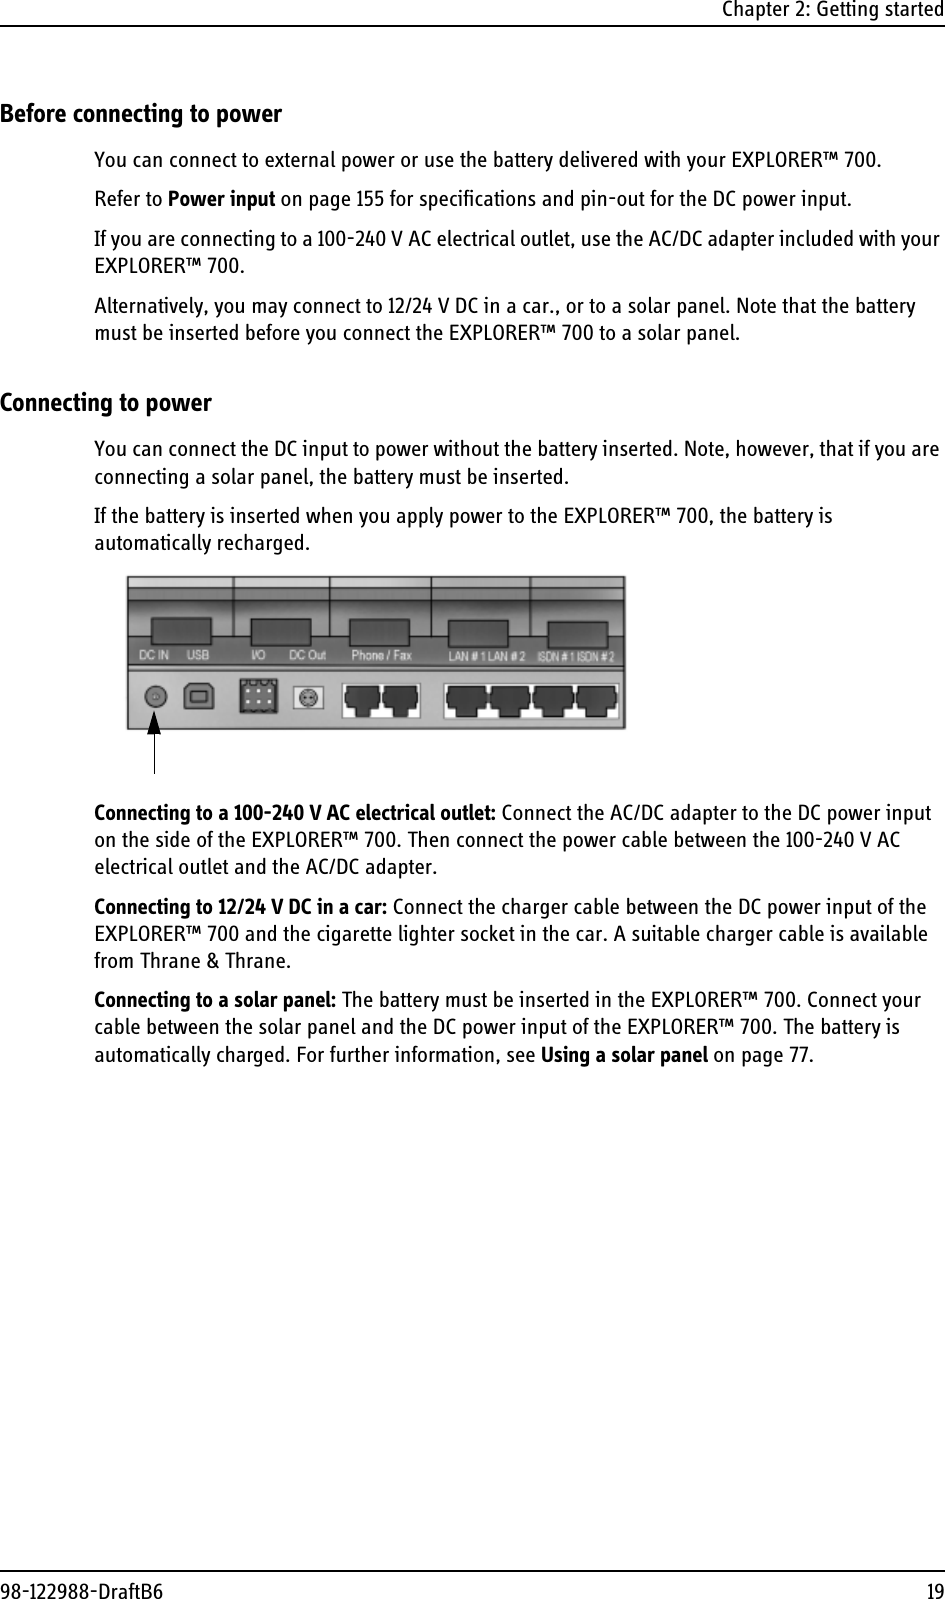 Chapter 2: Getting started98-122988-DraftB6 19Before connecting to powerYou can connect to external power or use the battery delivered with your EXPLORER™ 700.Refer to Power input on page 155 for specifications and pin-out for the DC power input.If you are connecting to a 100-240 V AC electrical outlet, use the AC/DC adapter included with your EXPLORER™ 700. Alternatively, you may connect to 12/24 V DC in a car., or to a solar panel. Note that the battery must be inserted before you connect the EXPLORER™ 700 to a solar panel.Connecting to powerYou can connect the DC input to power without the battery inserted. Note, however, that if you are connecting a solar panel, the battery must be inserted.If the battery is inserted when you apply power to the EXPLORER™ 700, the battery is automatically recharged. Connecting to a 100-240 V AC electrical outlet: Connect the AC/DC adapter to the DC power input on the side of the EXPLORER™ 700. Then connect the power cable between the 100-240 V AC electrical outlet and the AC/DC adapter. Connecting to 12/24 V DC in a car: Connect the charger cable between the DC power input of the EXPLORER™ 700 and the cigarette lighter socket in the car. A suitable charger cable is available from Thrane &amp; Thrane.Connecting to a solar panel: The battery must be inserted in the EXPLORER™ 700. Connect your cable between the solar panel and the DC power input of the EXPLORER™ 700. The battery is automatically charged. For further information, see Using a solar panel on page 77.